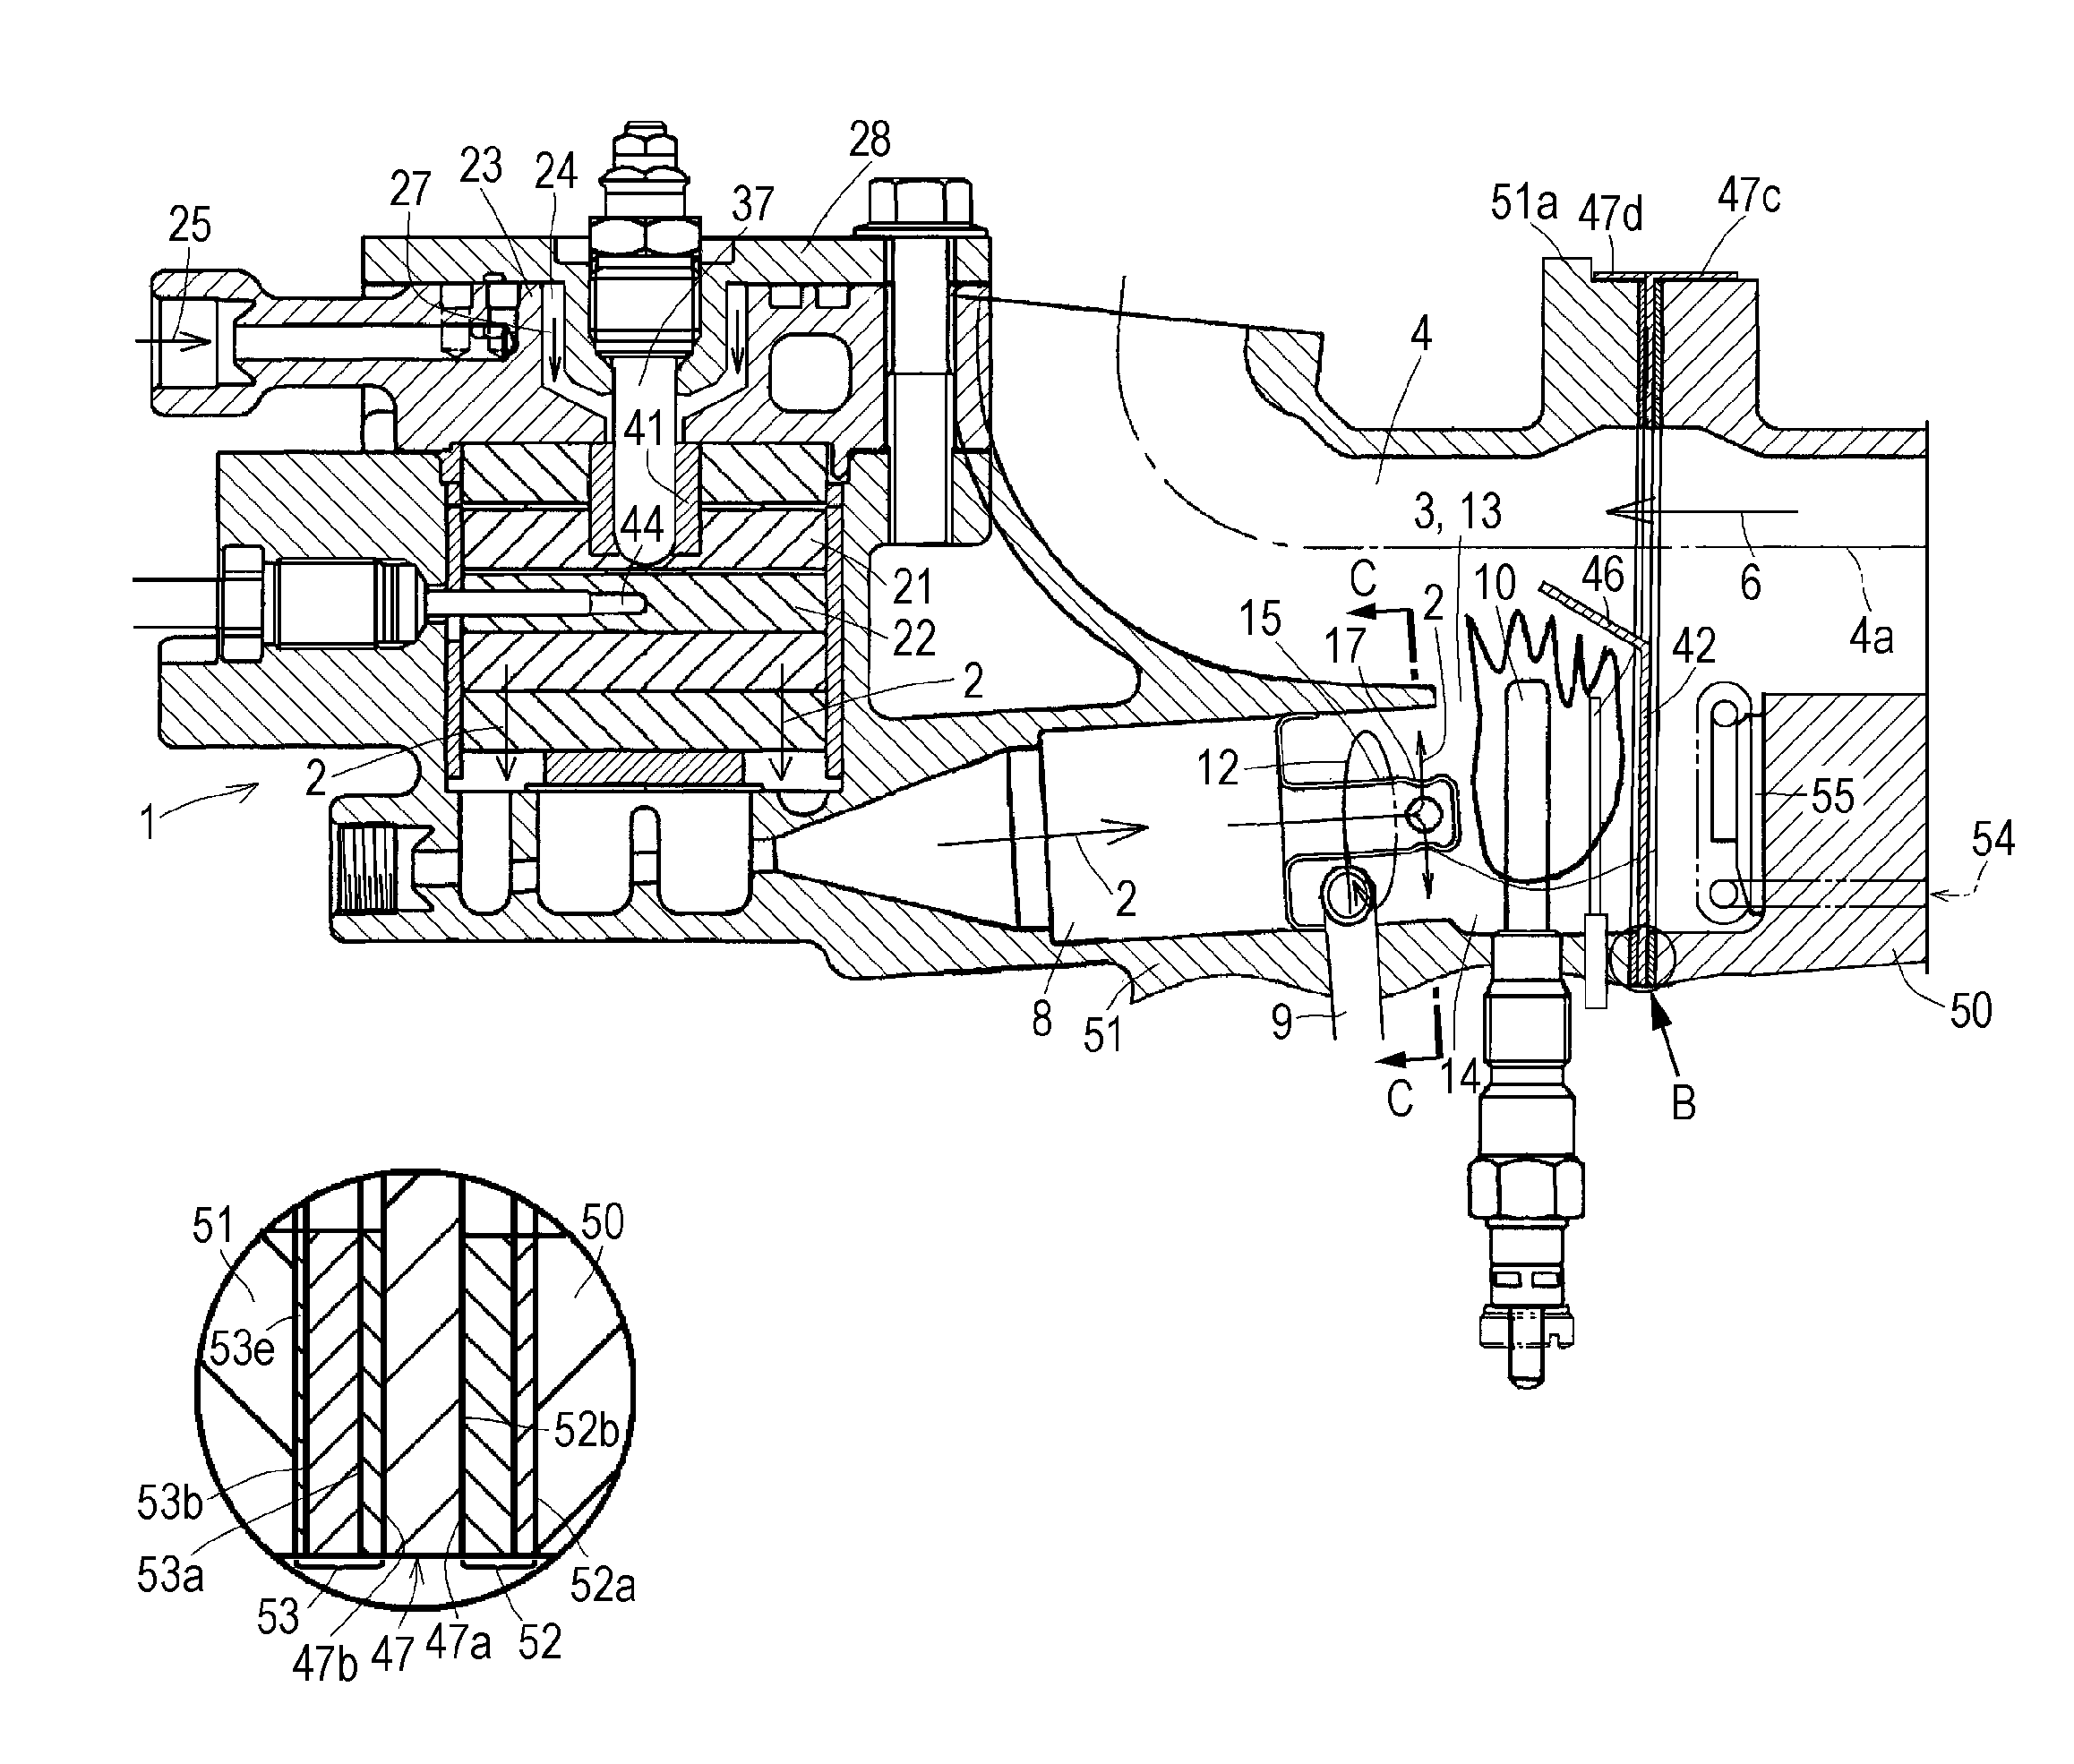 Exhaust treatment apparatus for engine